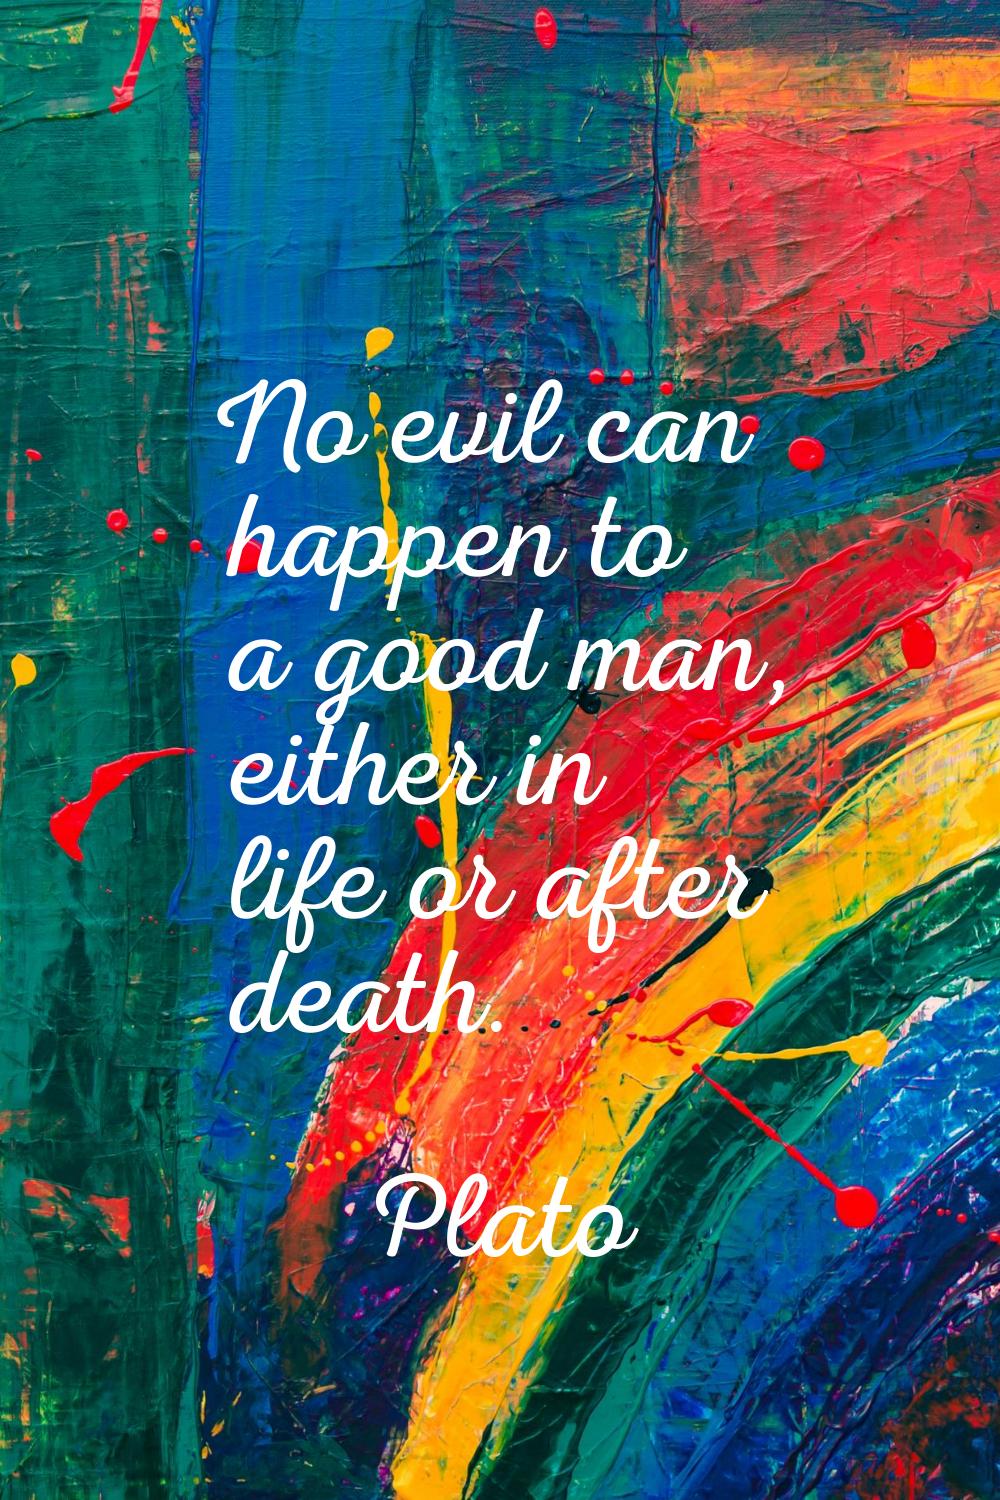 No evil can happen to a good man, either in life or after death.